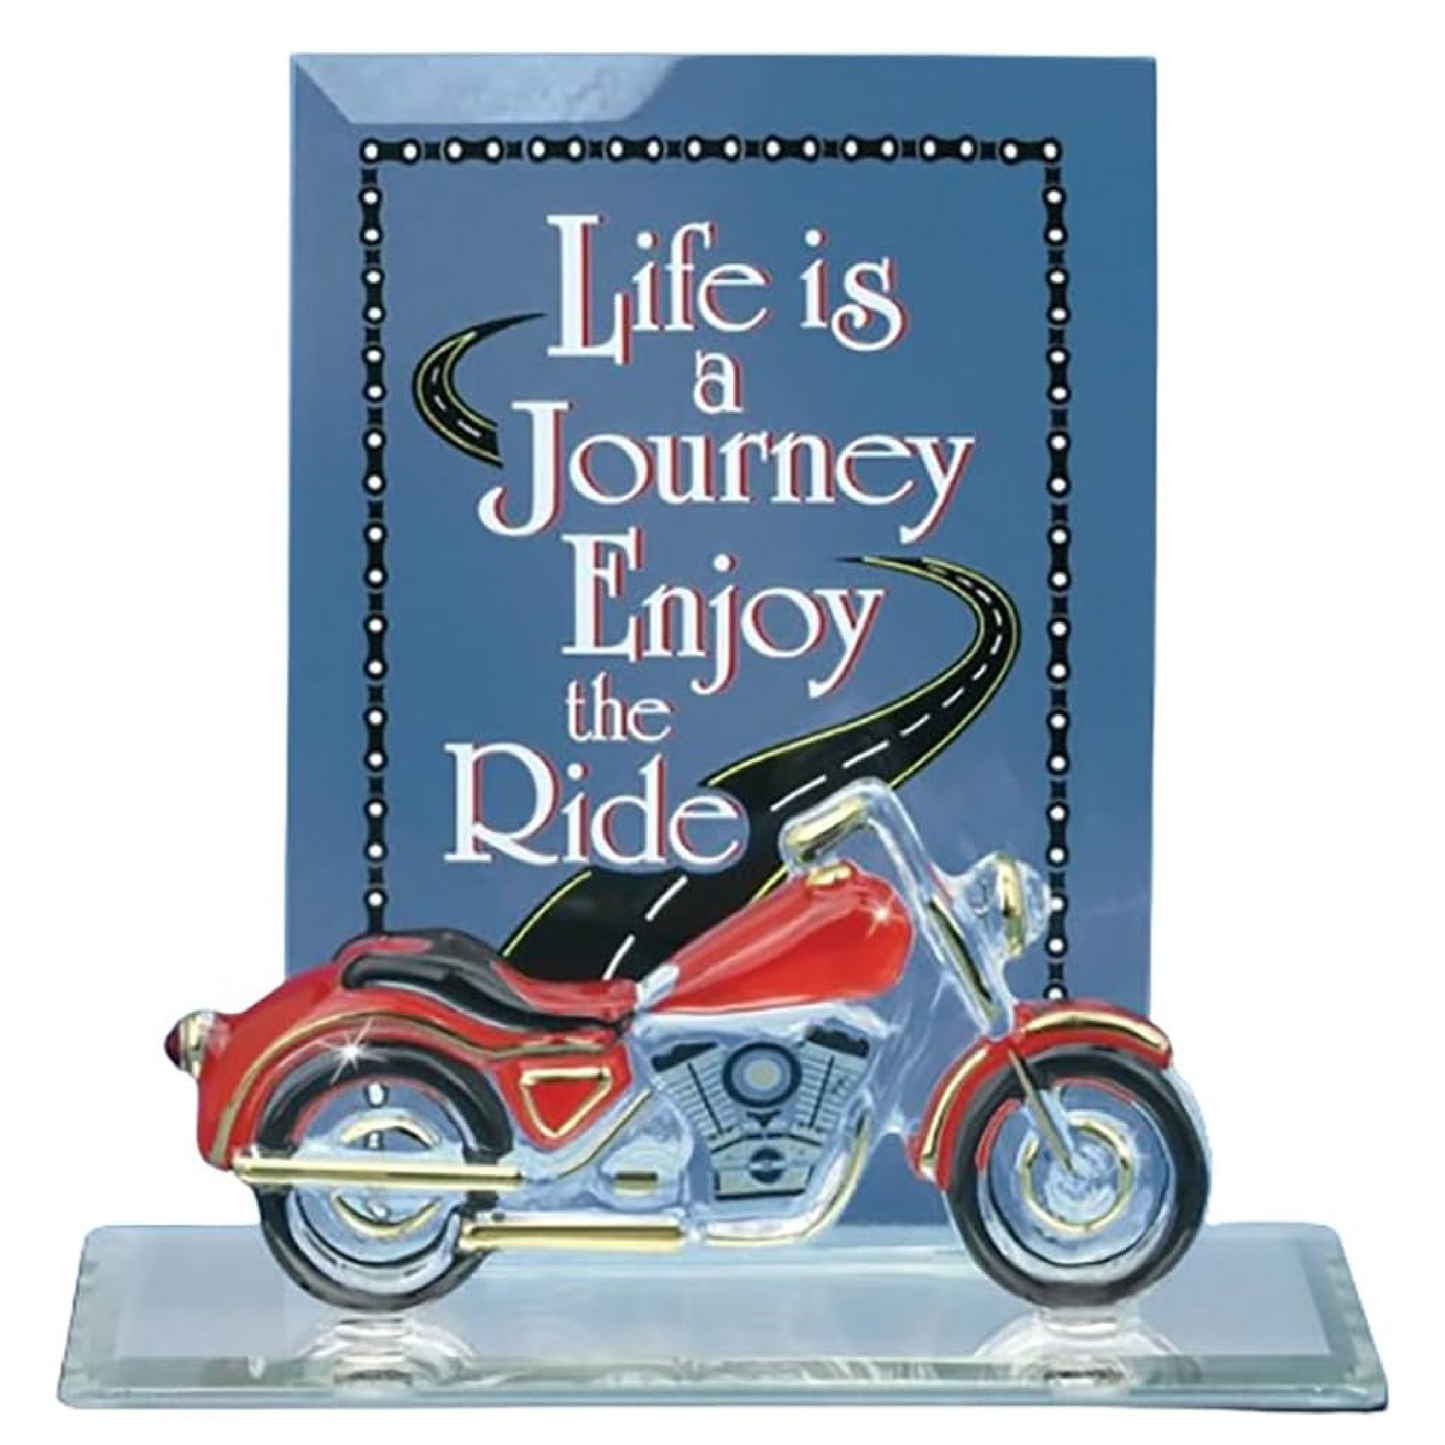 Glass Baron "Life is a Journey" Motorcycle Plaque